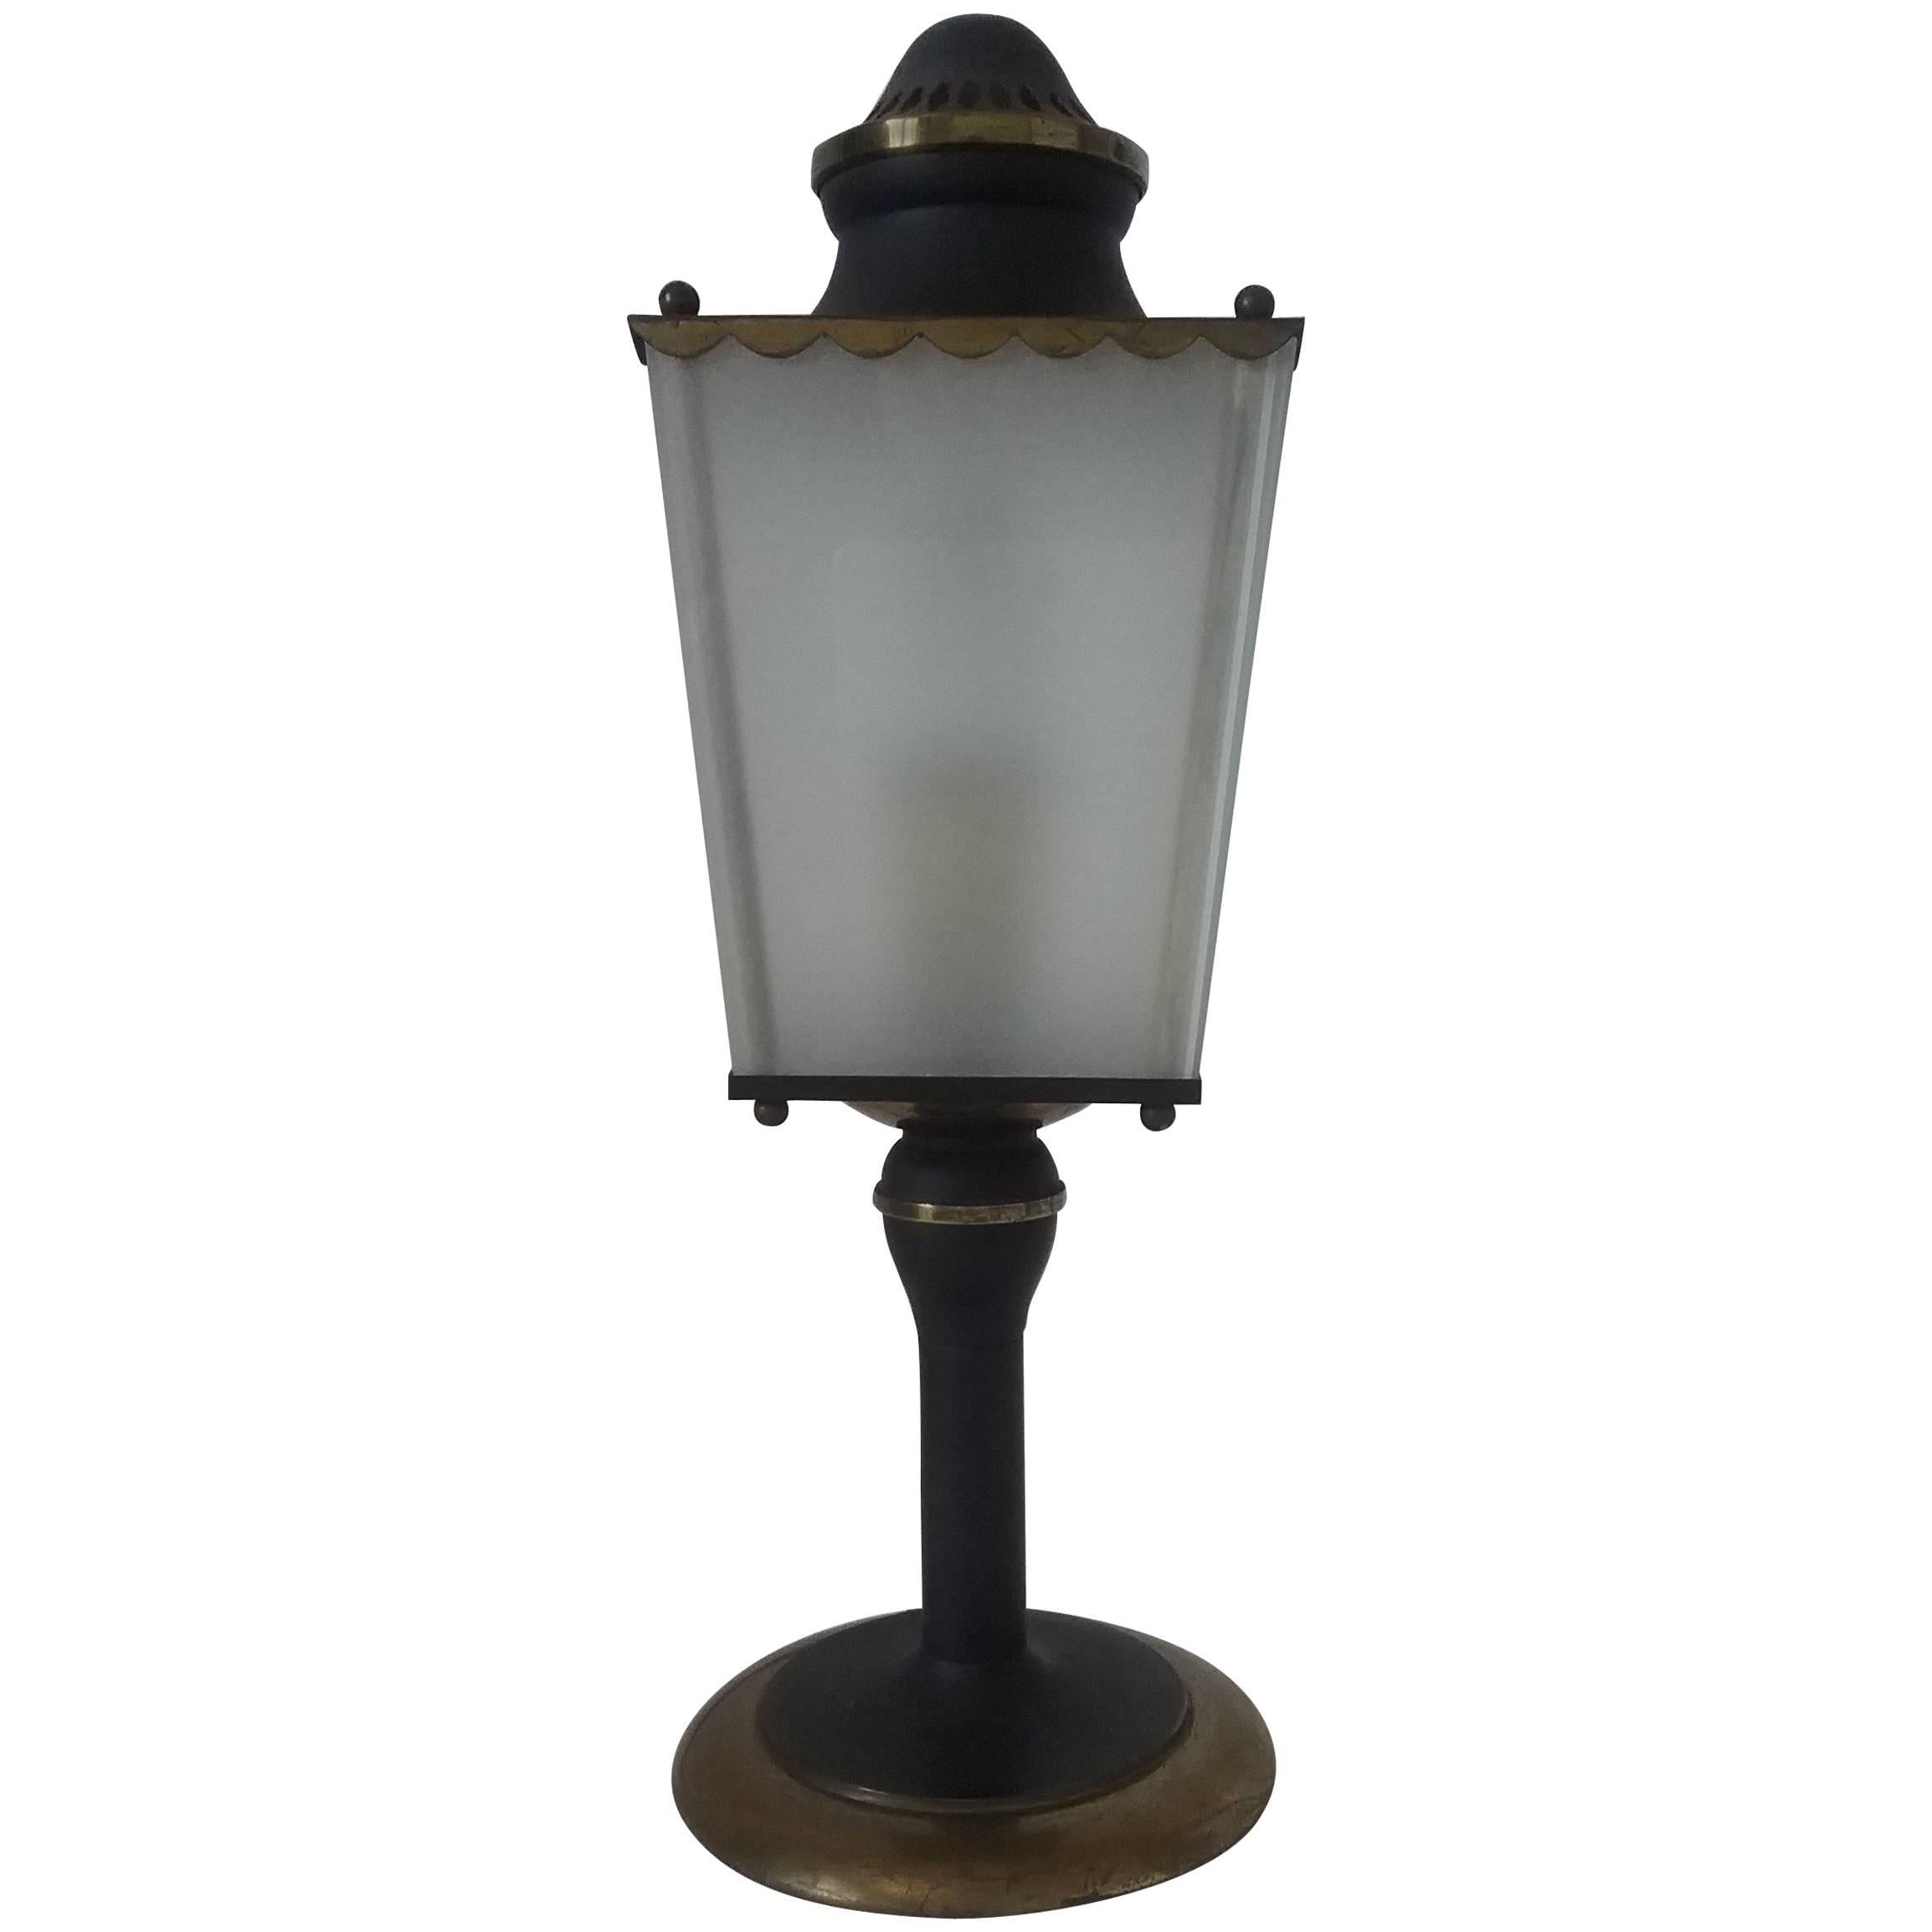 1950s French Table Lamp, Parisian Old Street Light by Gerfaux, Paris For Sale